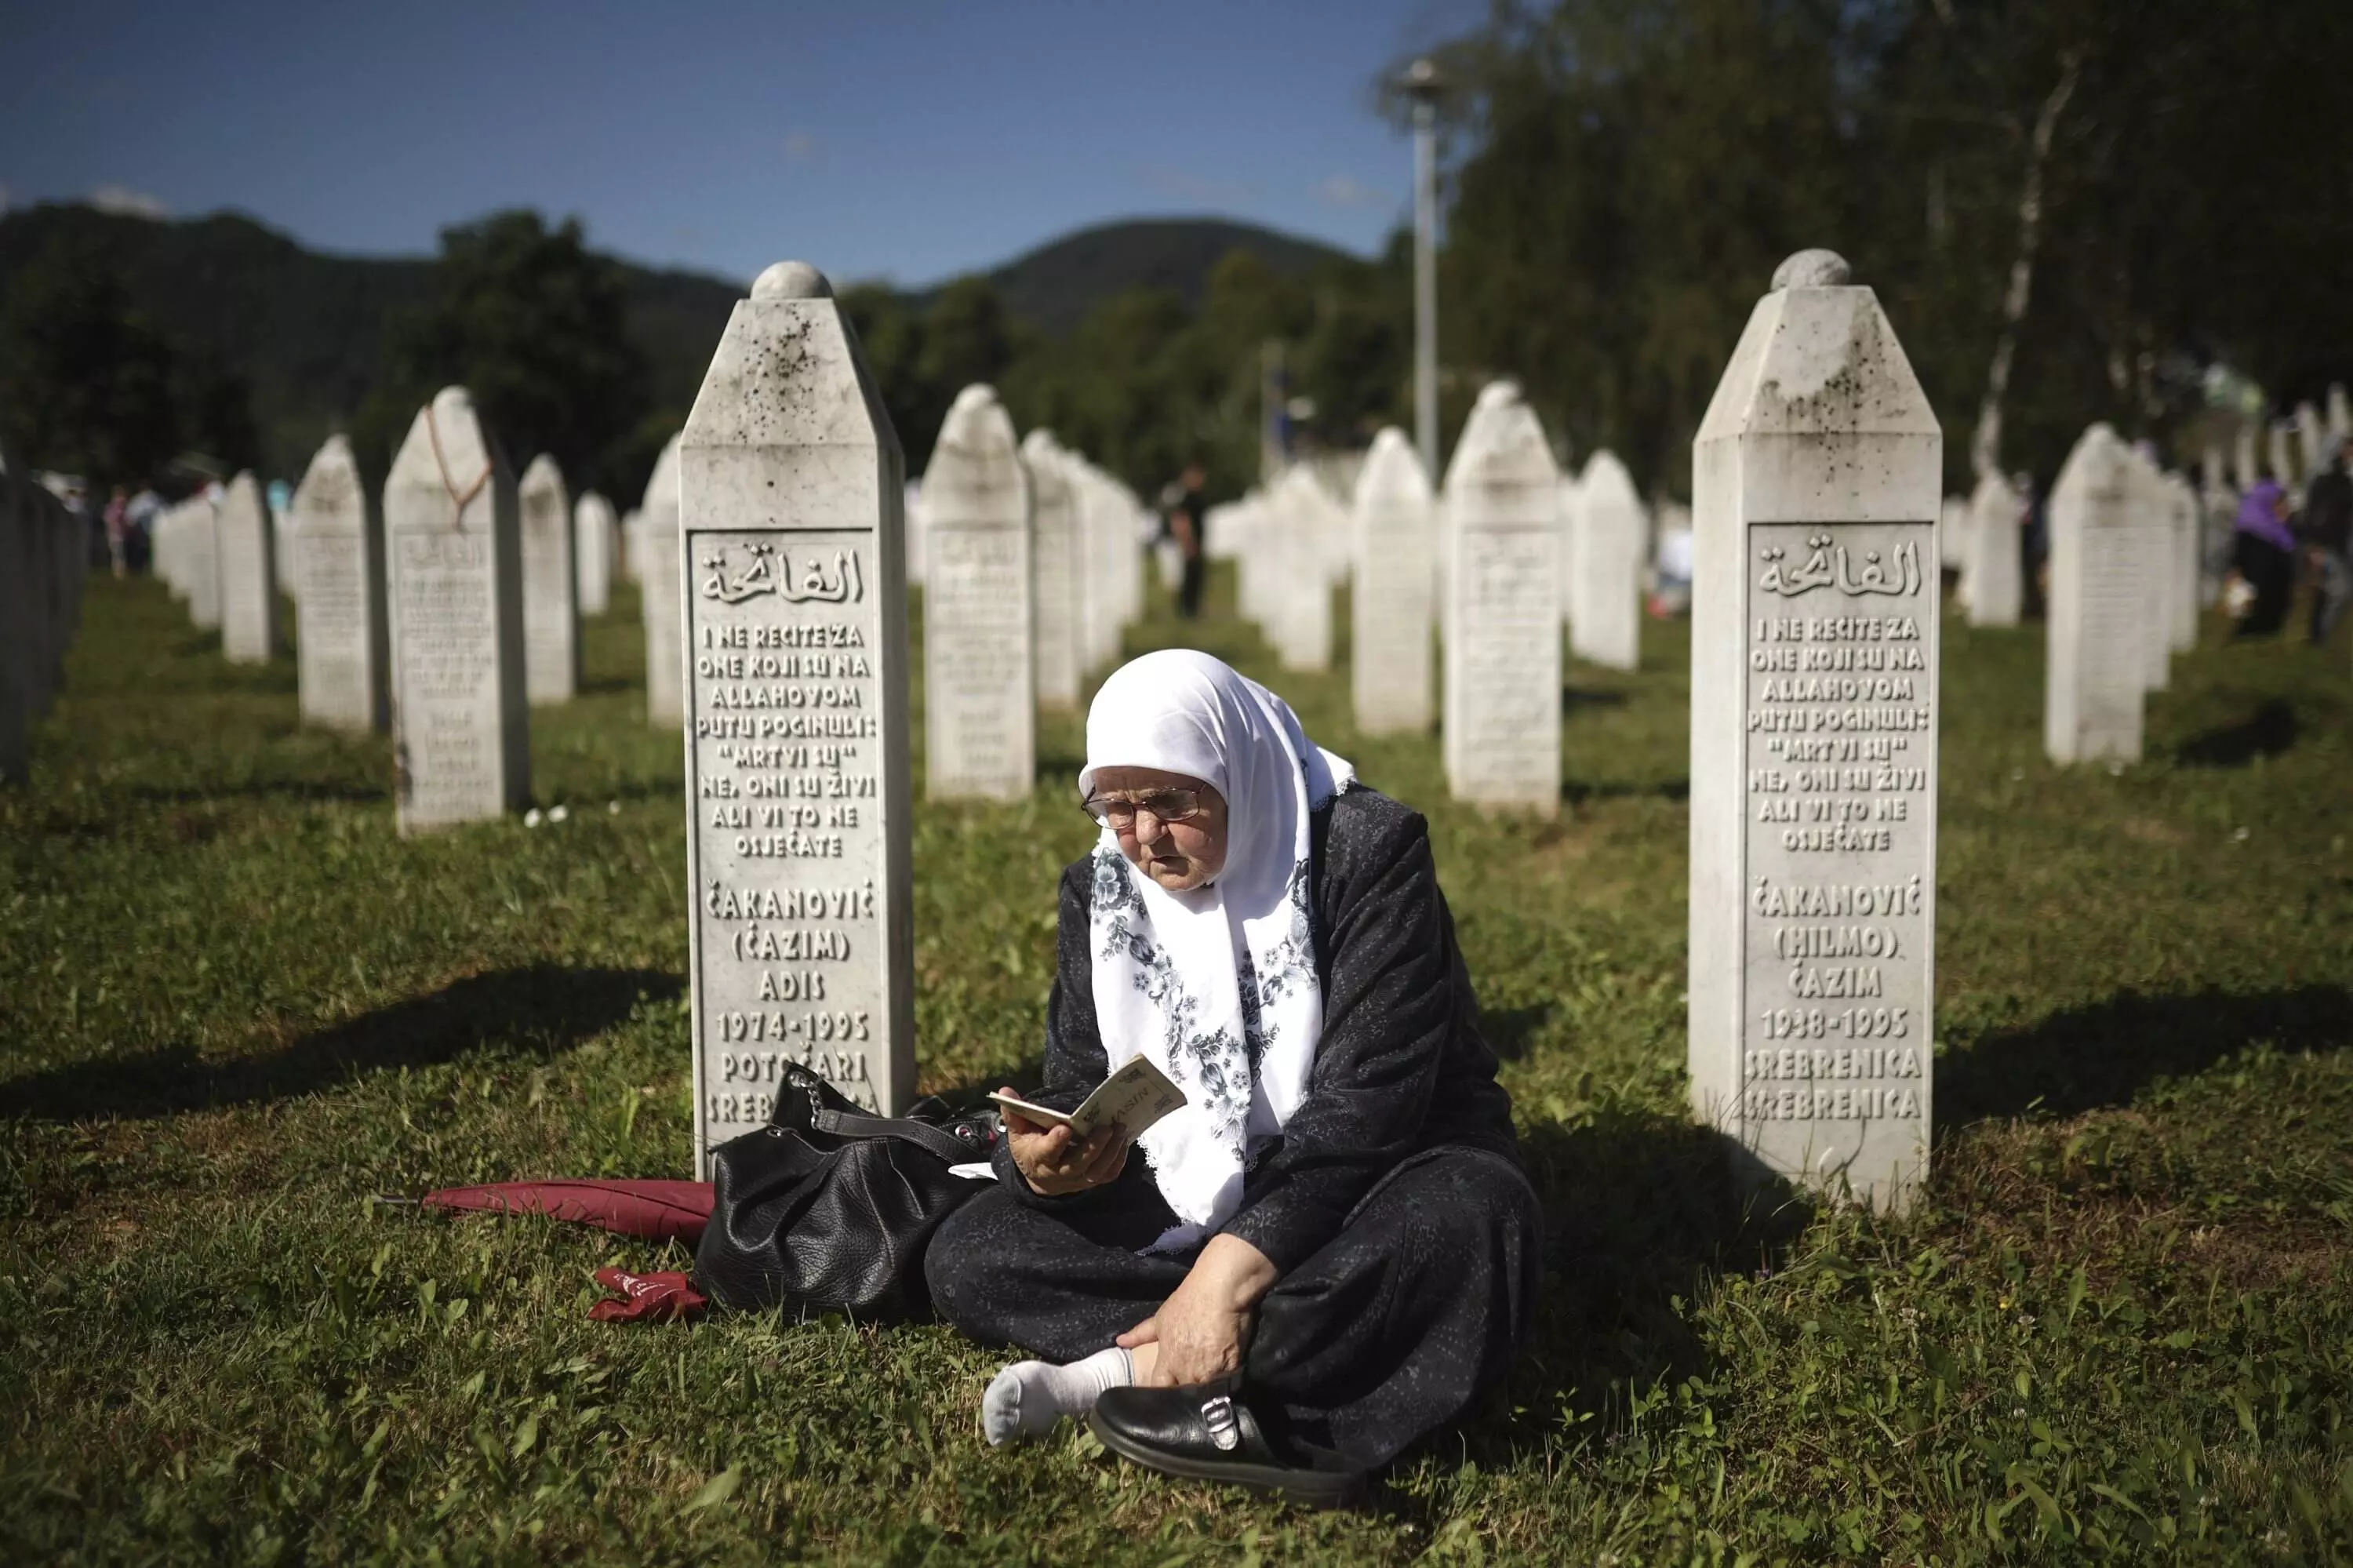 What is, and is not, common between Maliana and Srebrenica